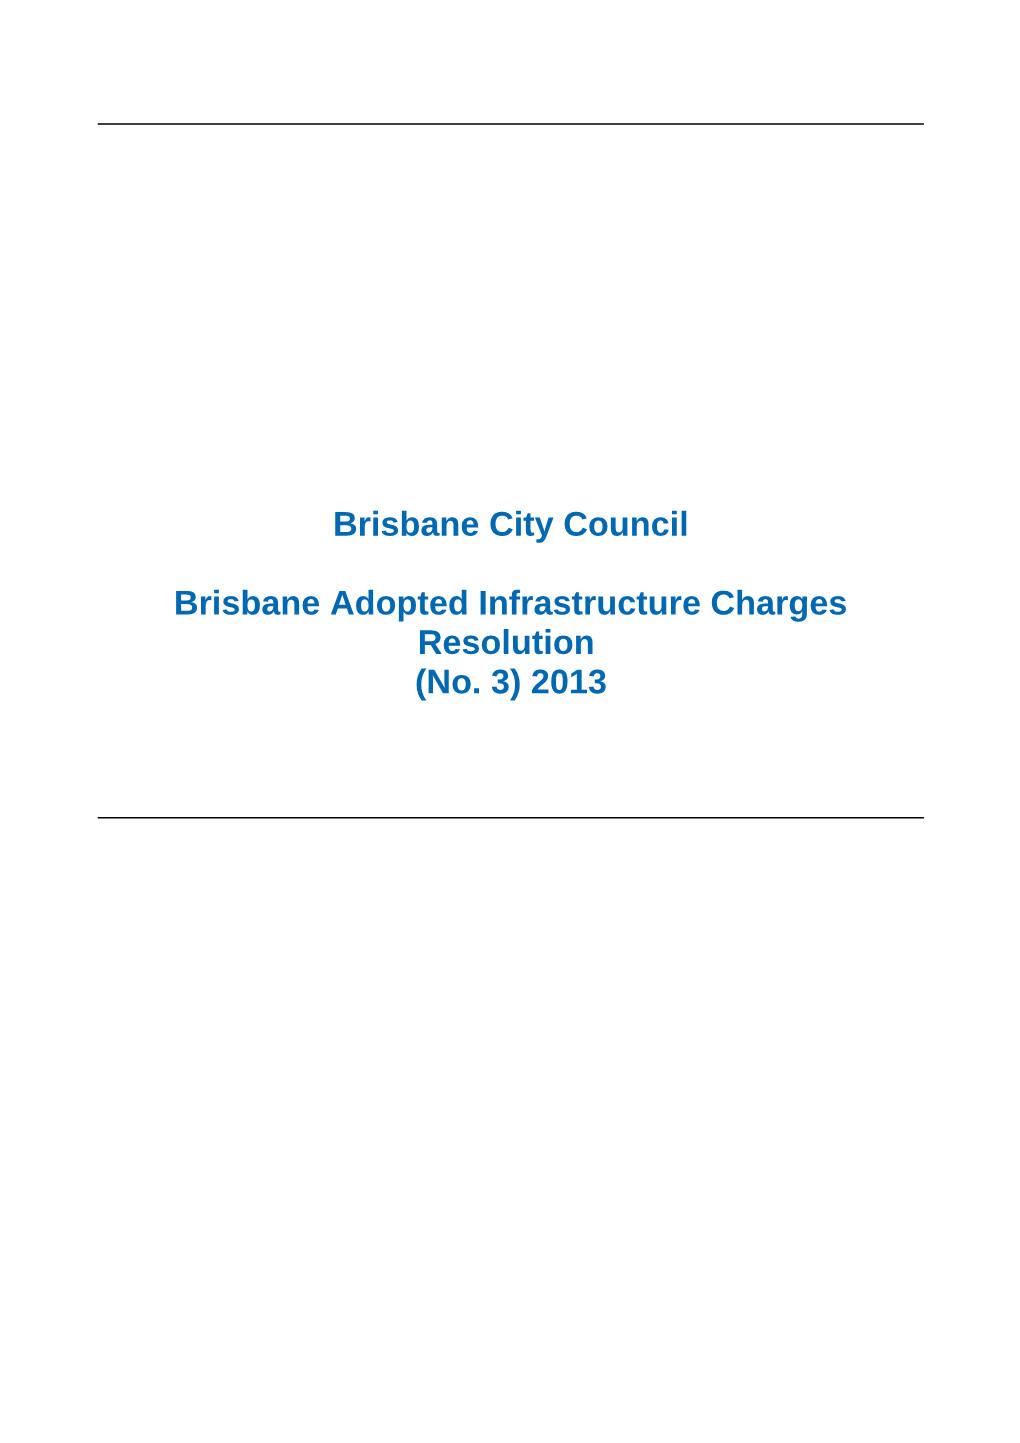 Brisbane Adopted Infrastructure Charges Resolution No. 3 2013